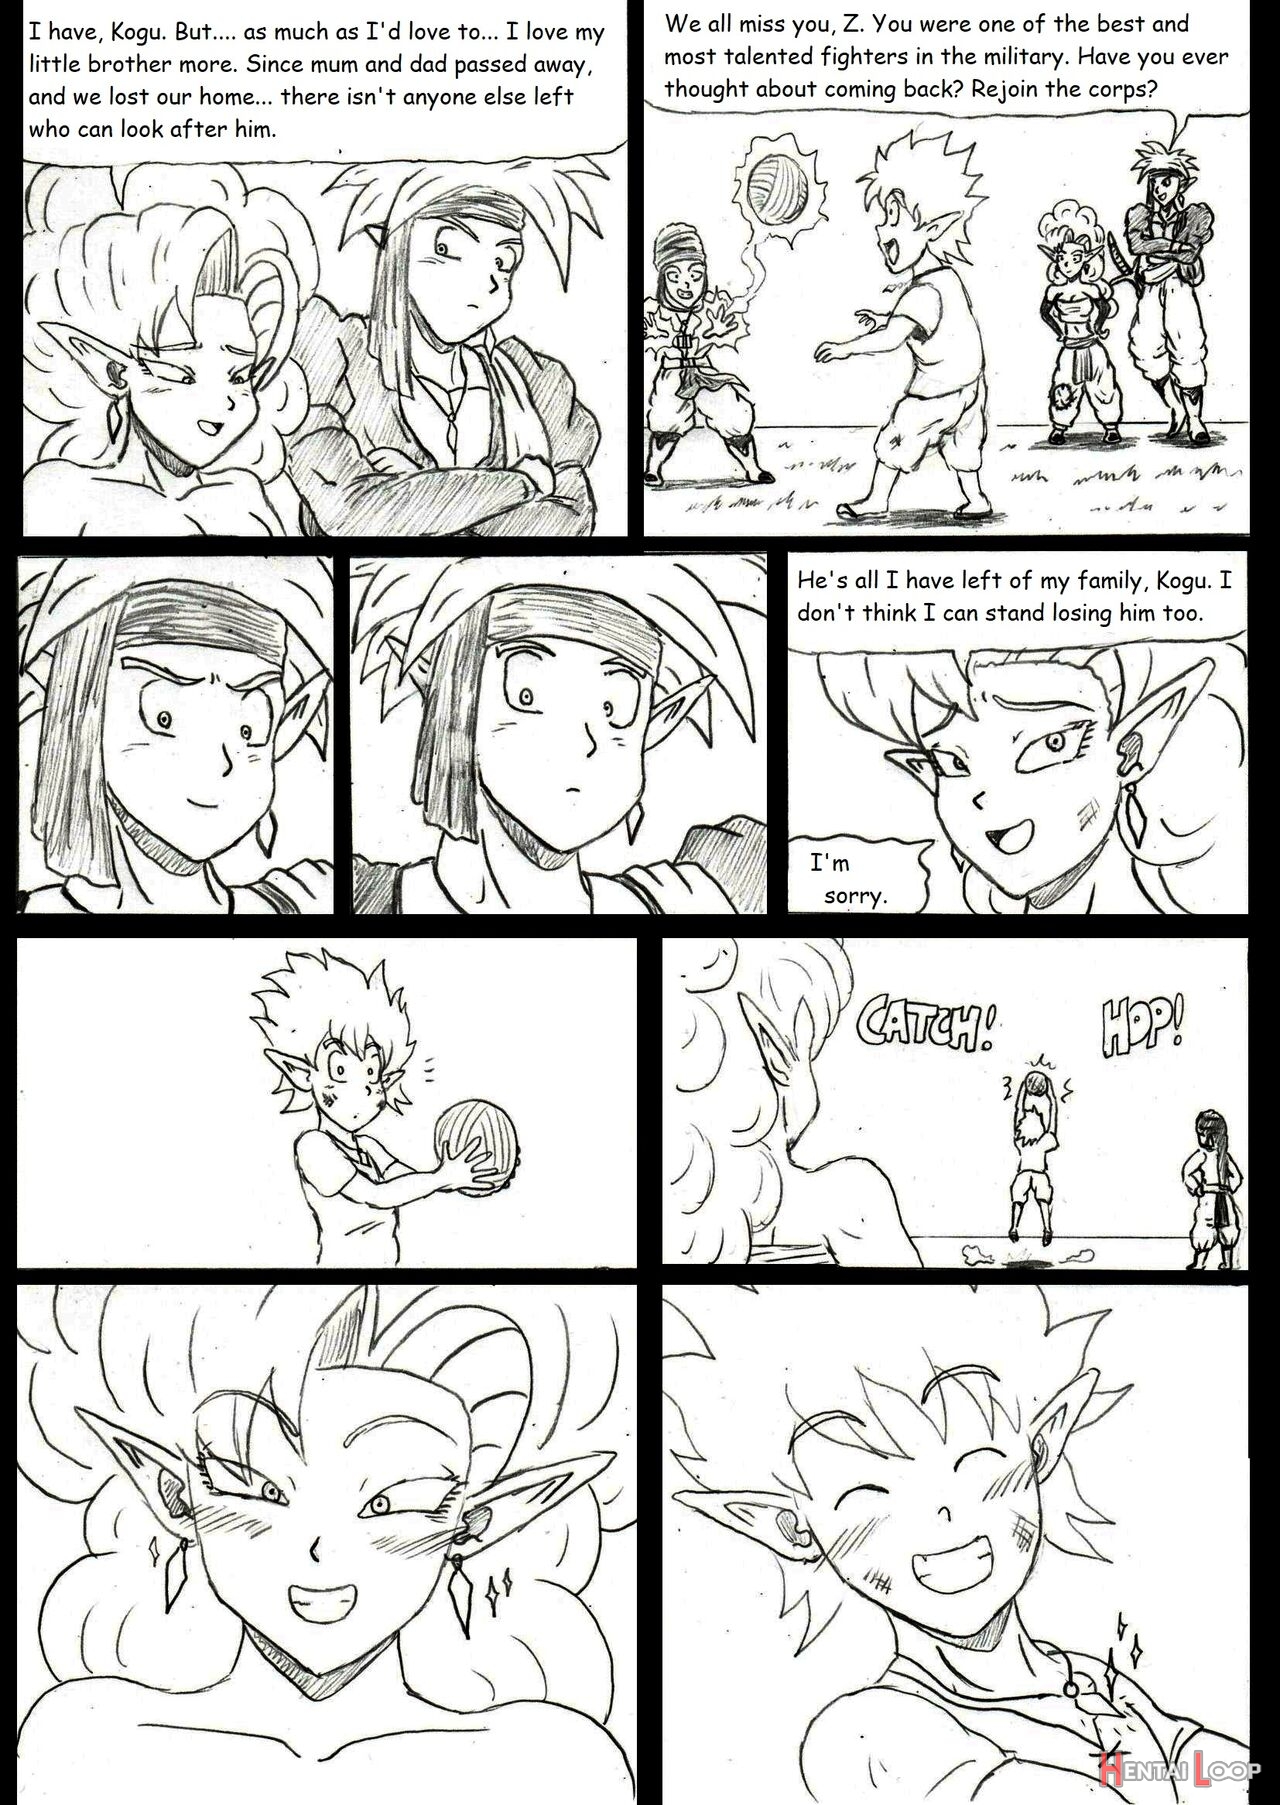 Dragonball Z Golden Age - Chapter 4 - The Galaxy Soldiers page 5